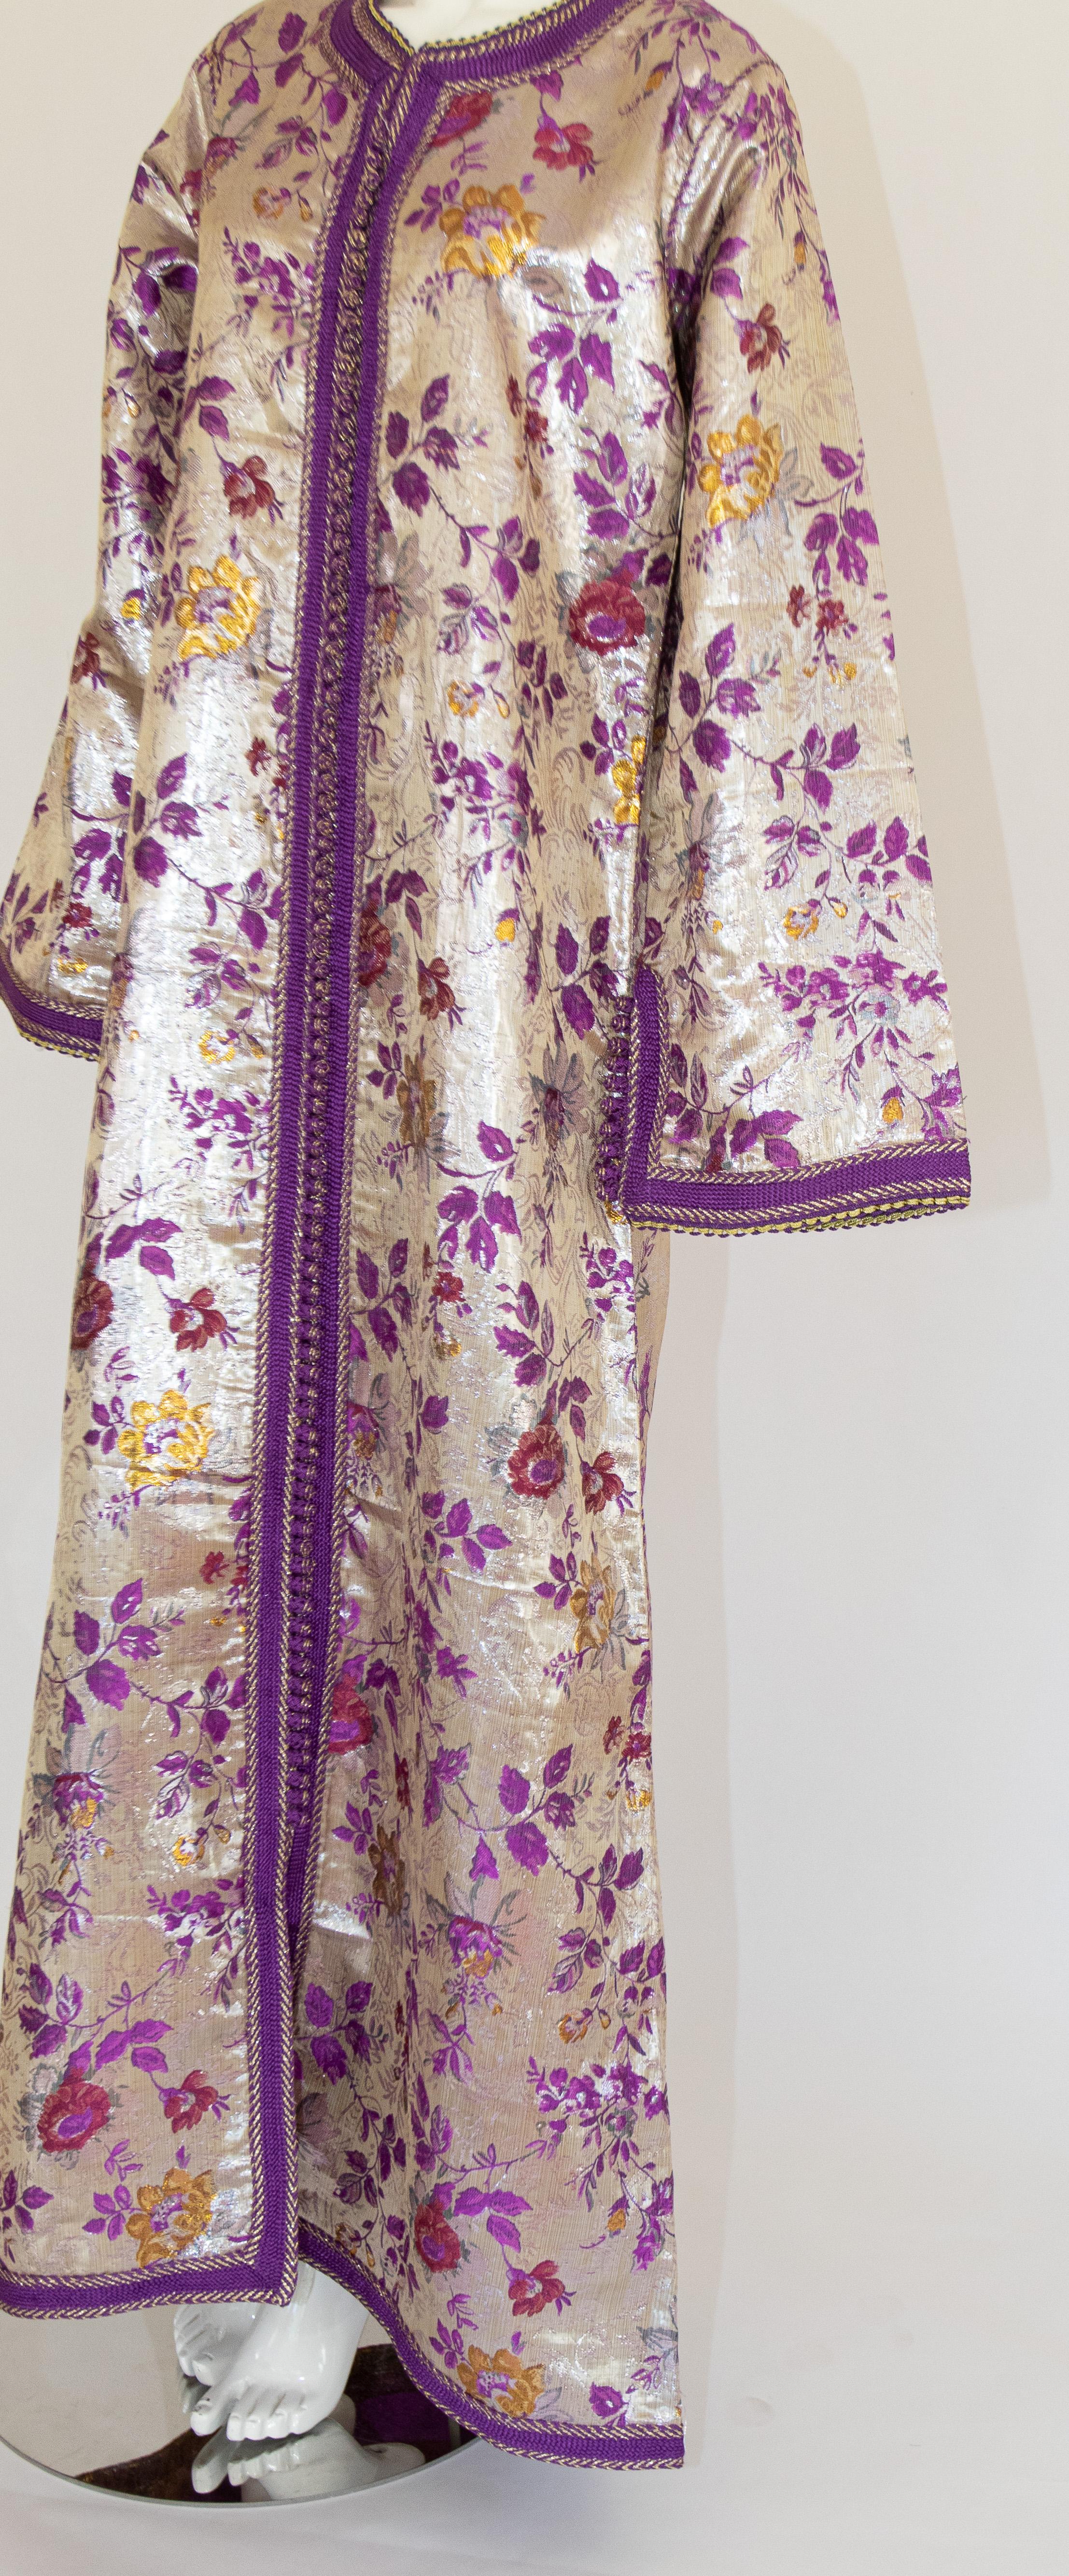 Moroccan Caftan Purple and Silver Damask Embroidered, Vintage, 1960s In Good Condition For Sale In North Hollywood, CA